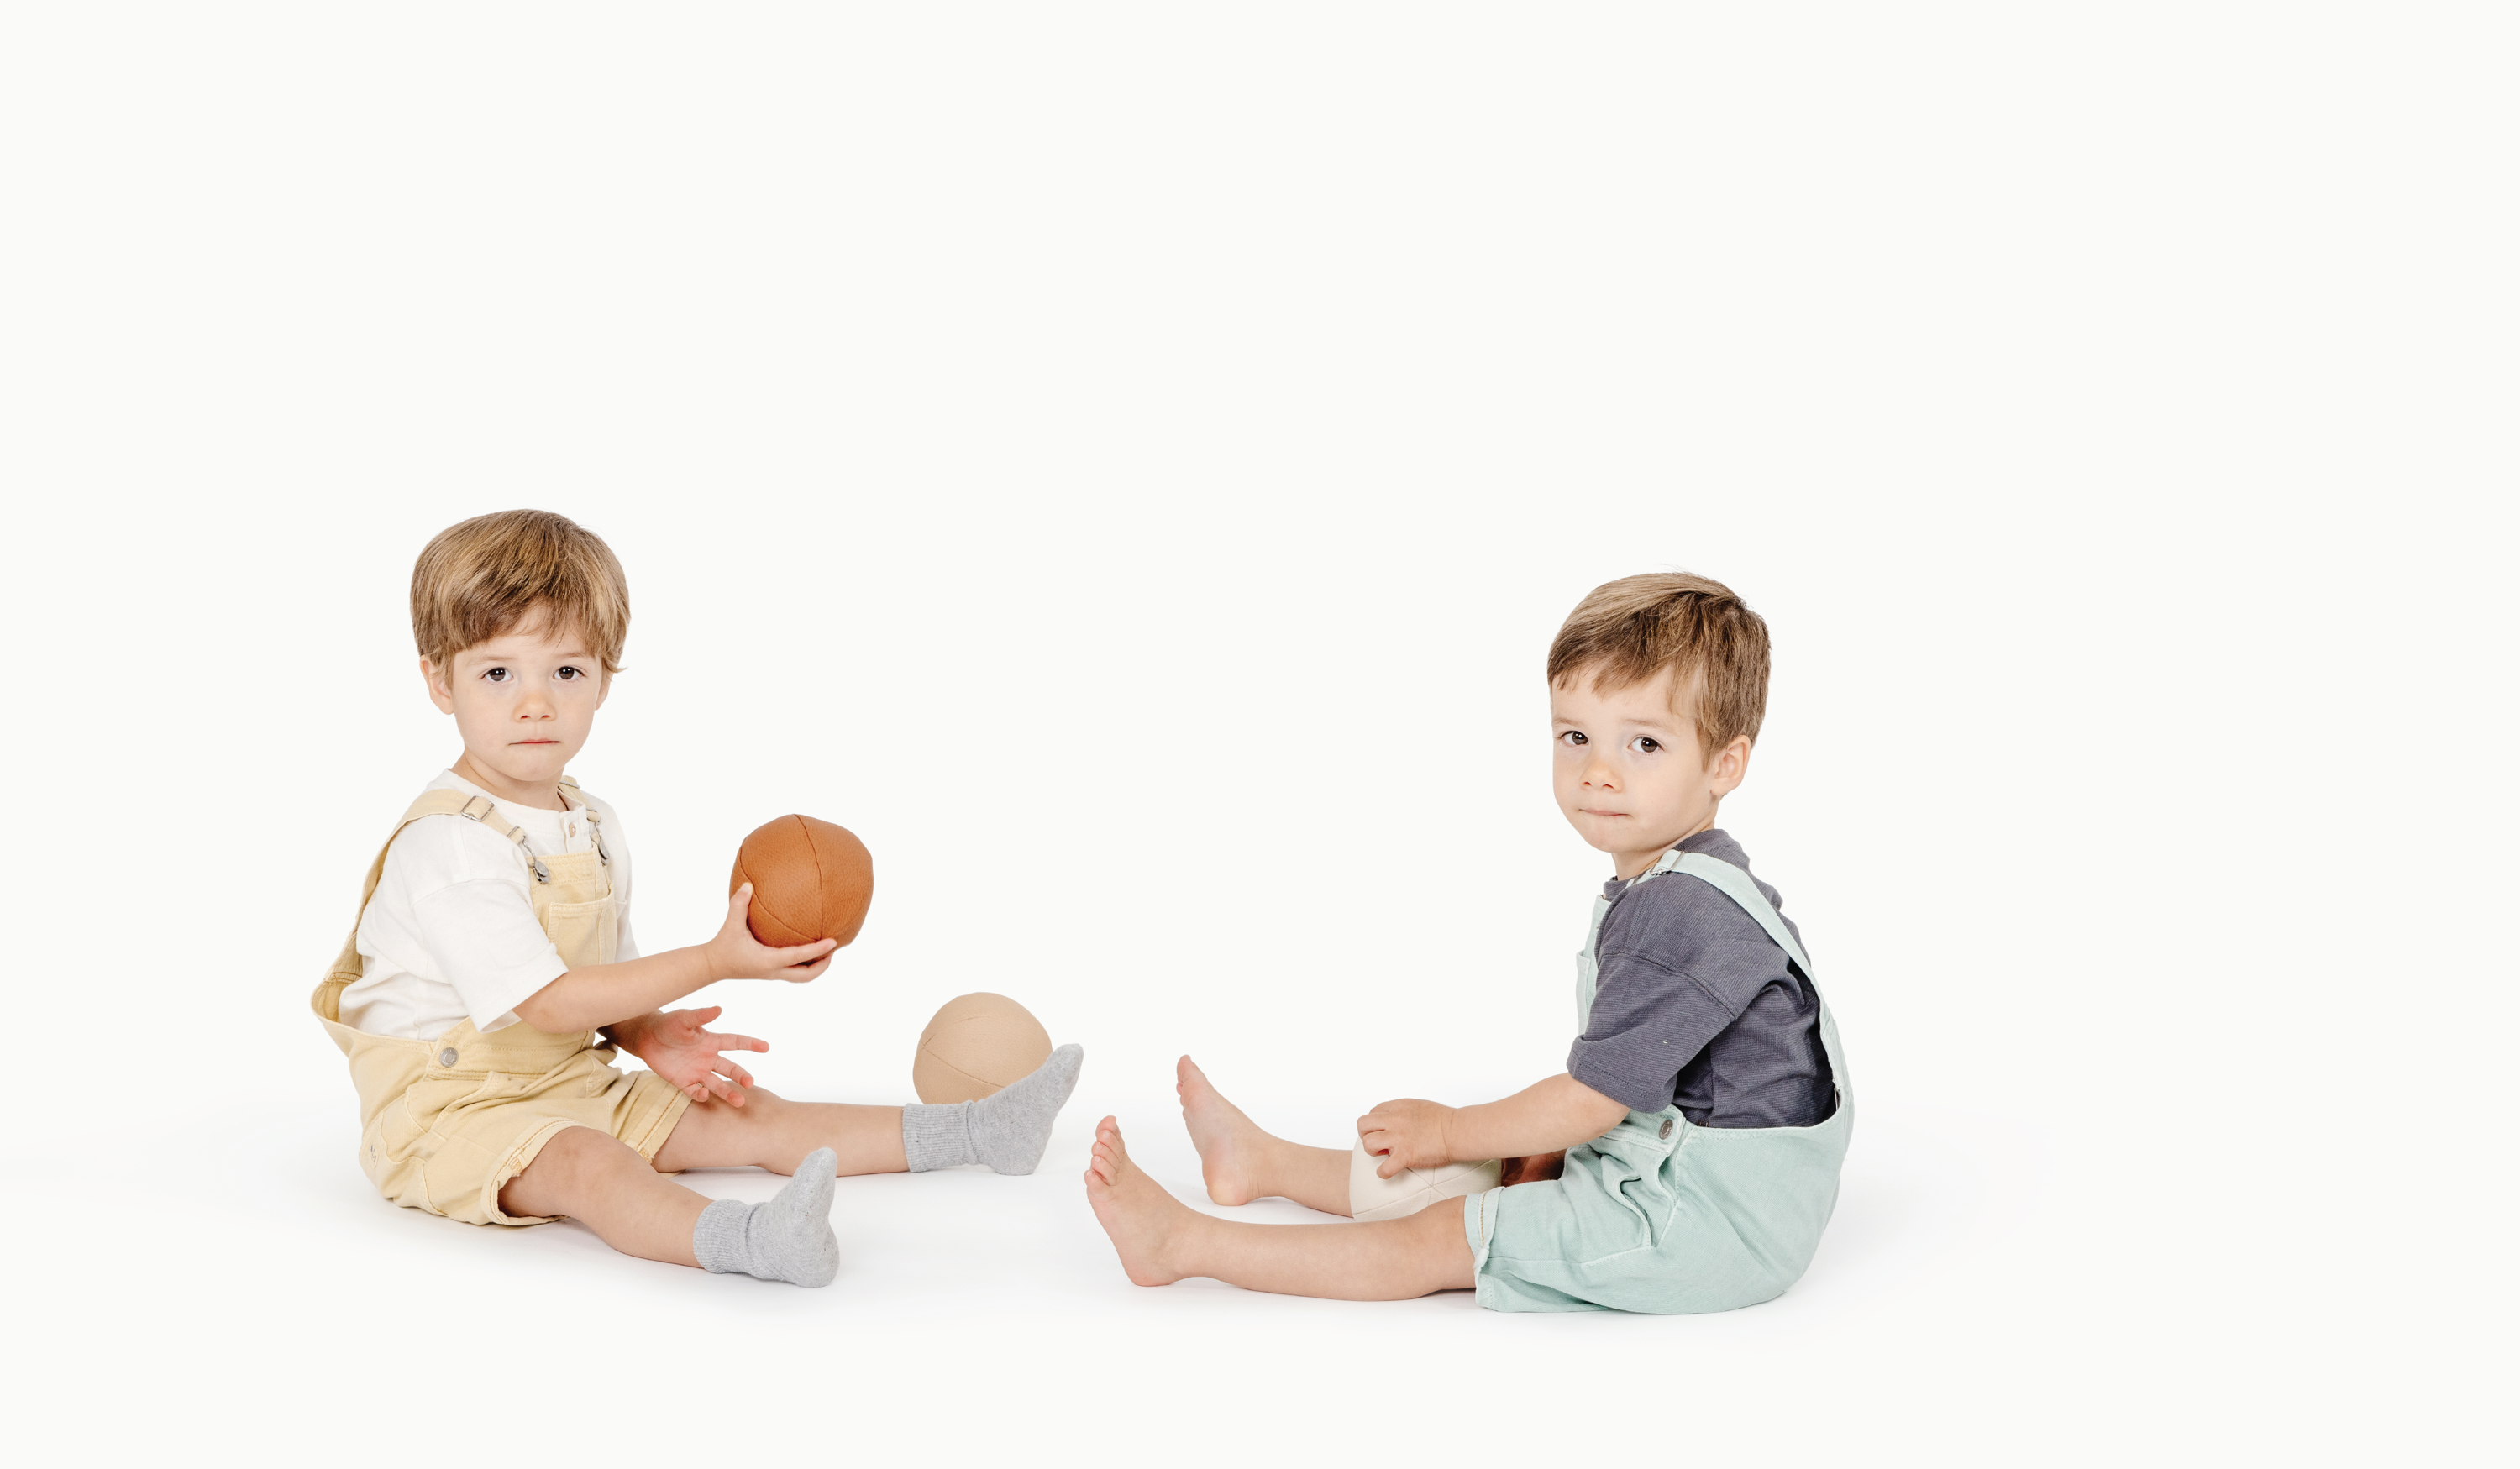 Boys sitting on the floor playing with Gathre Play Balls